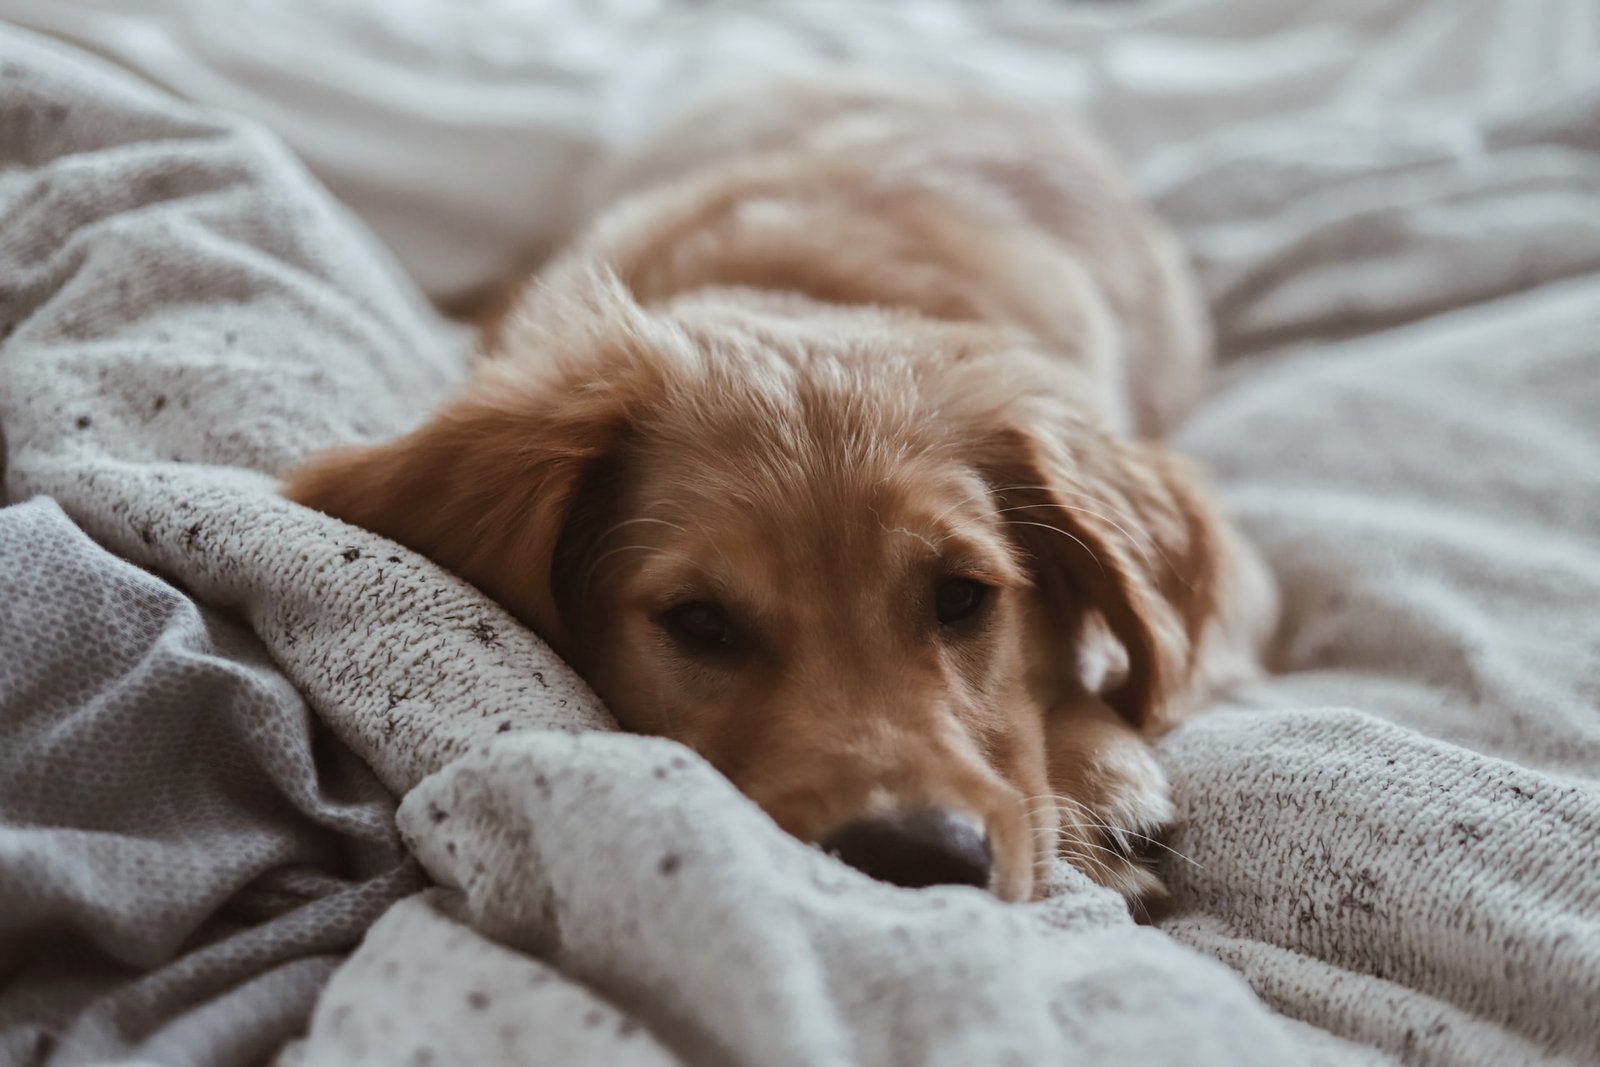 Why Does My Dog Pee on His Blanket? (7 Possible Reasons)